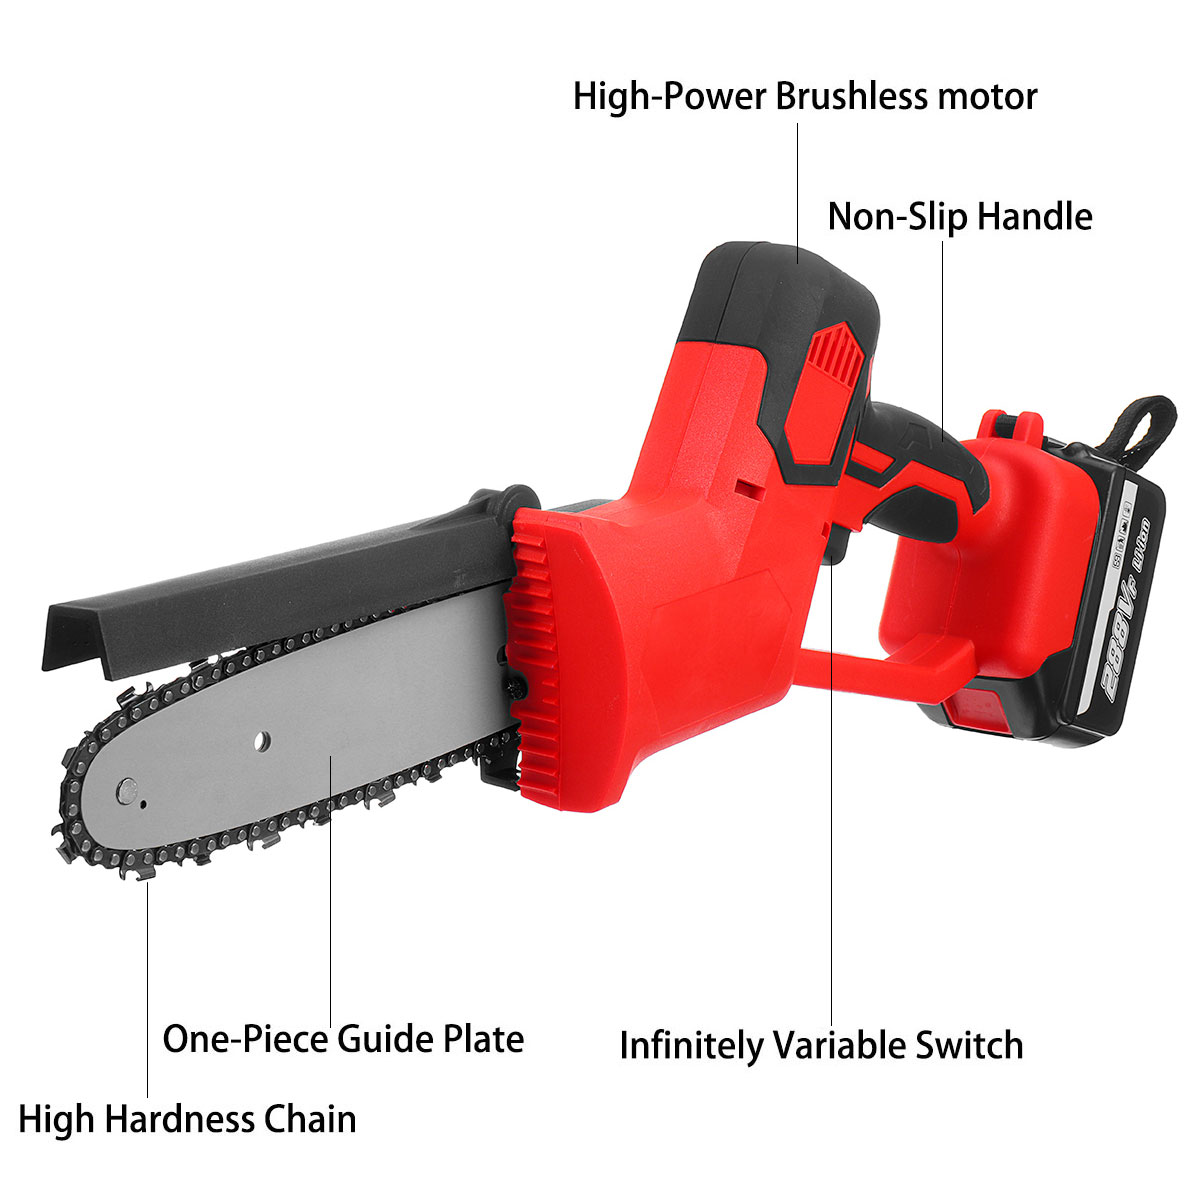 8-Inch-Cordless-Electric-Chain-Saw-288VF--Brushless-Motor-Power-Tools-Chainsaw-1854536-2